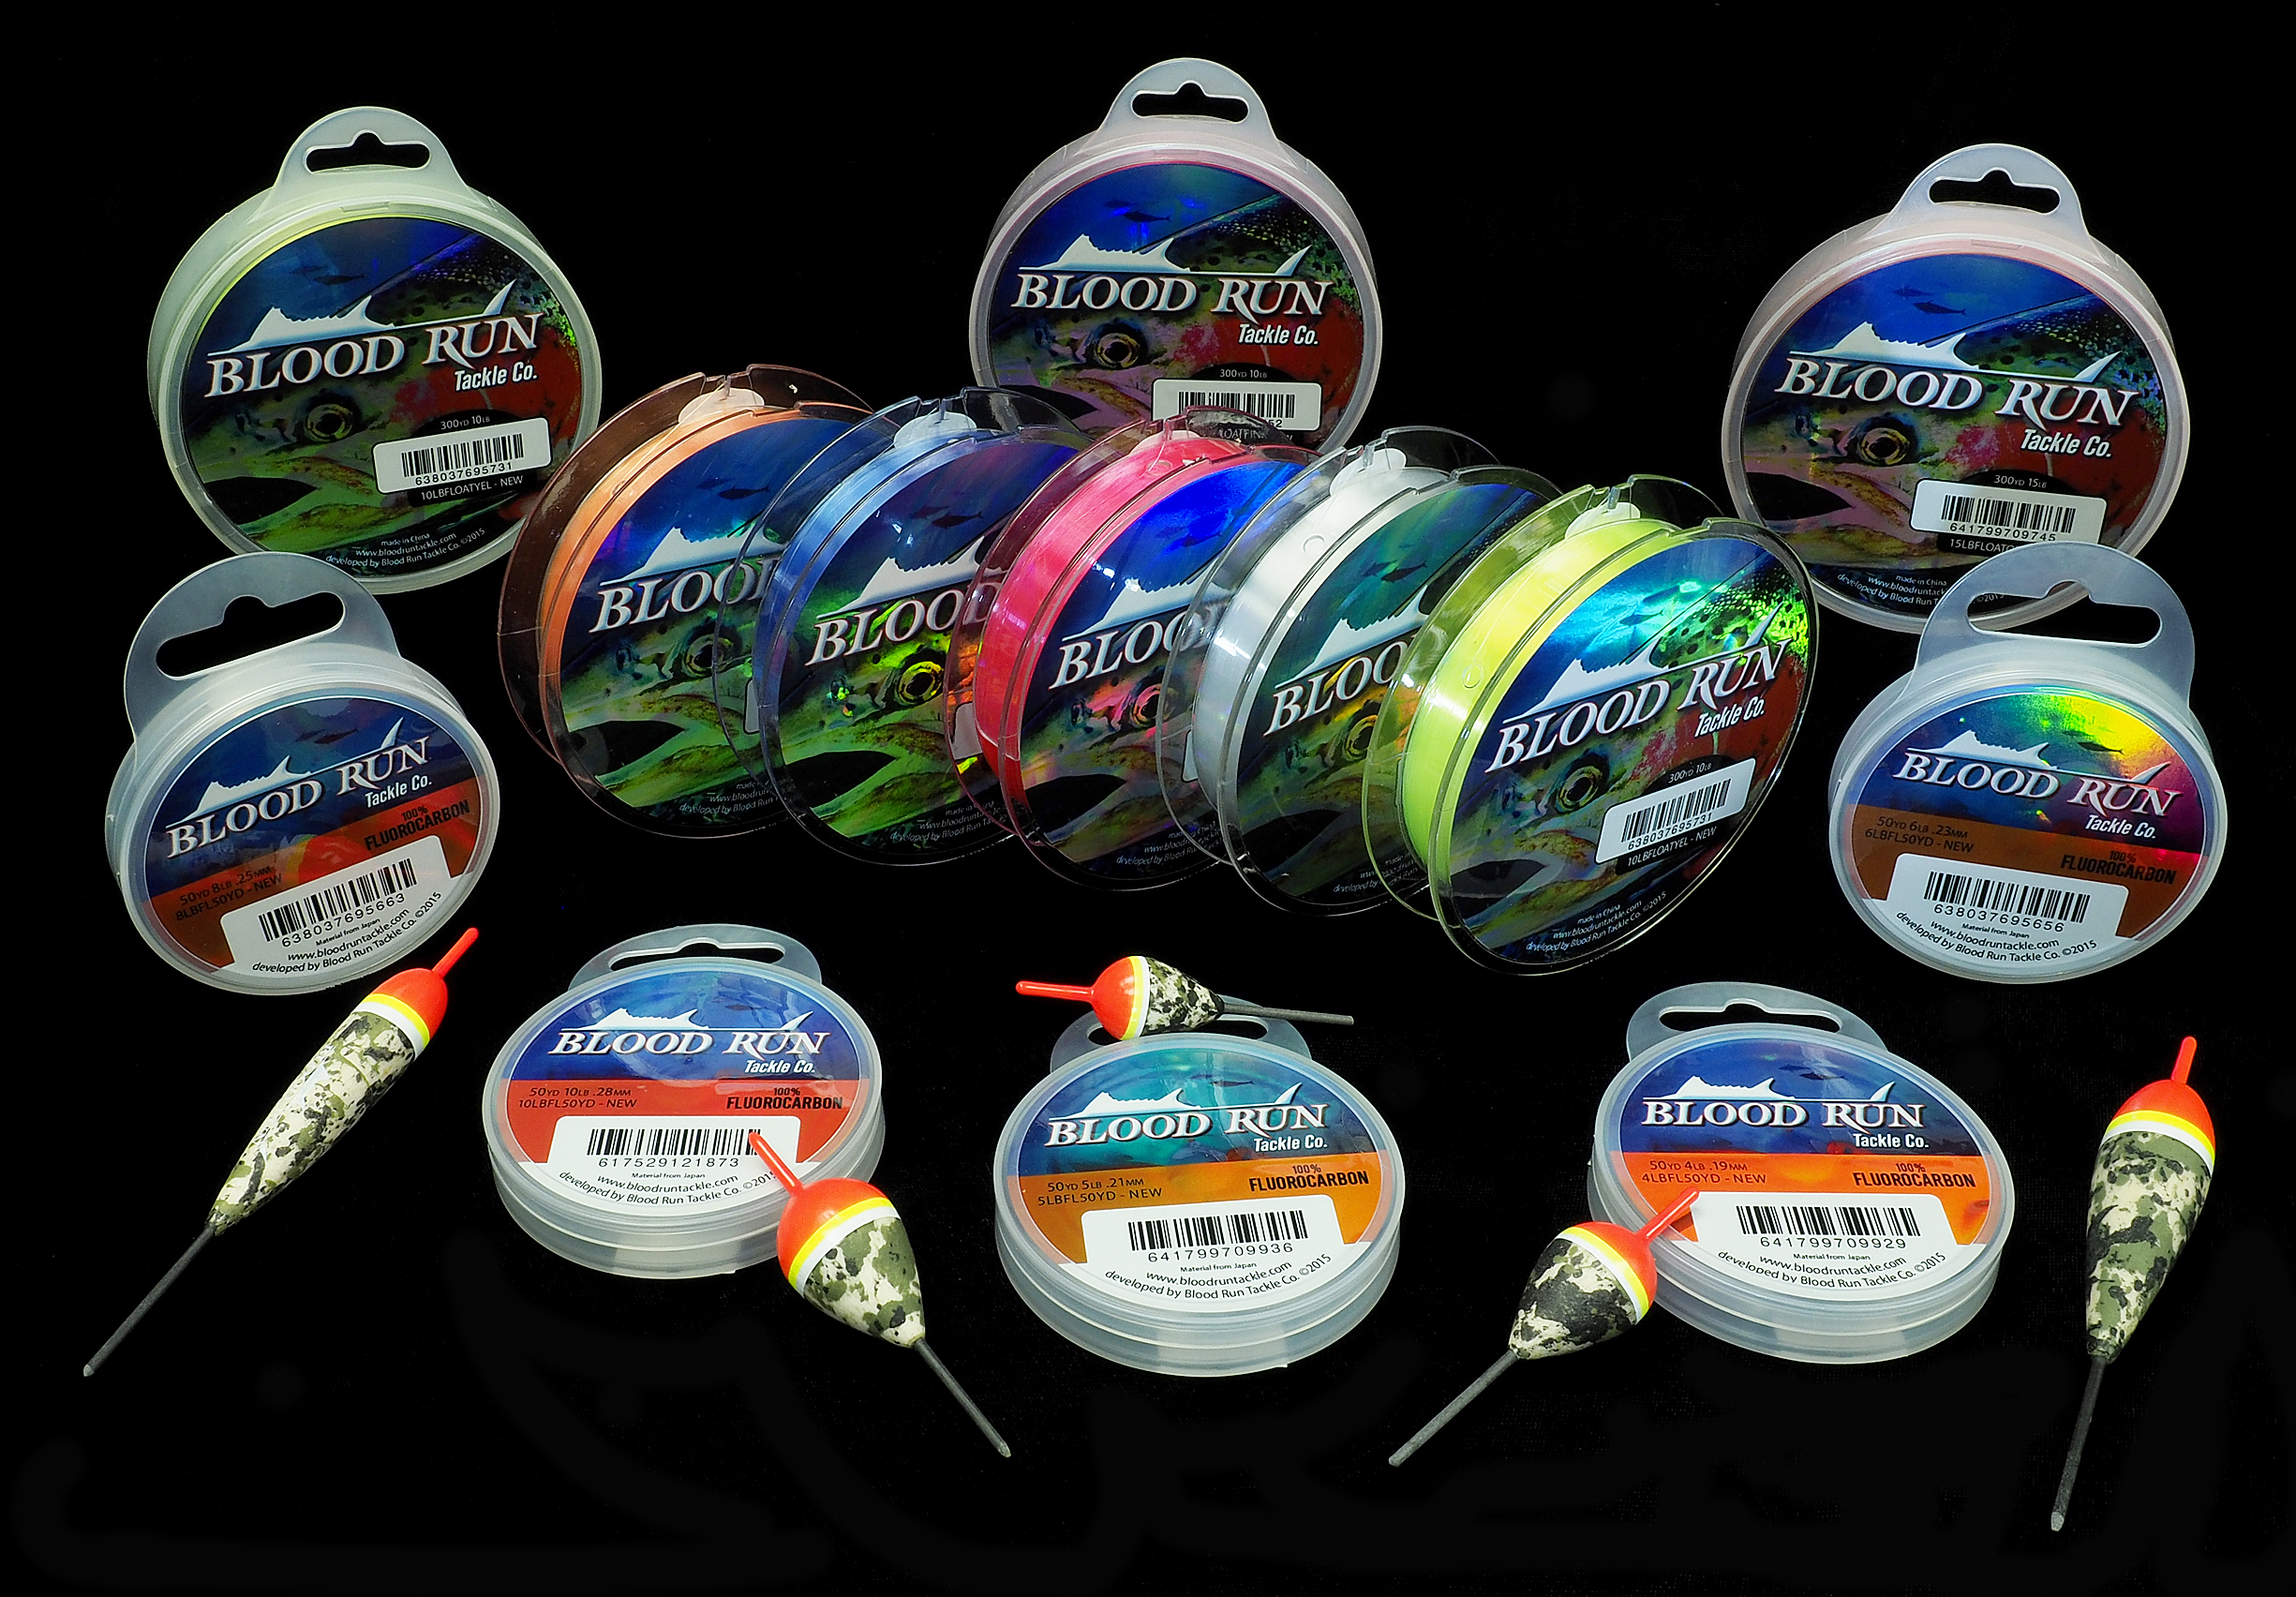 Blood Run Tackle Co. – The First Cast – Hook, Line and Sinker's